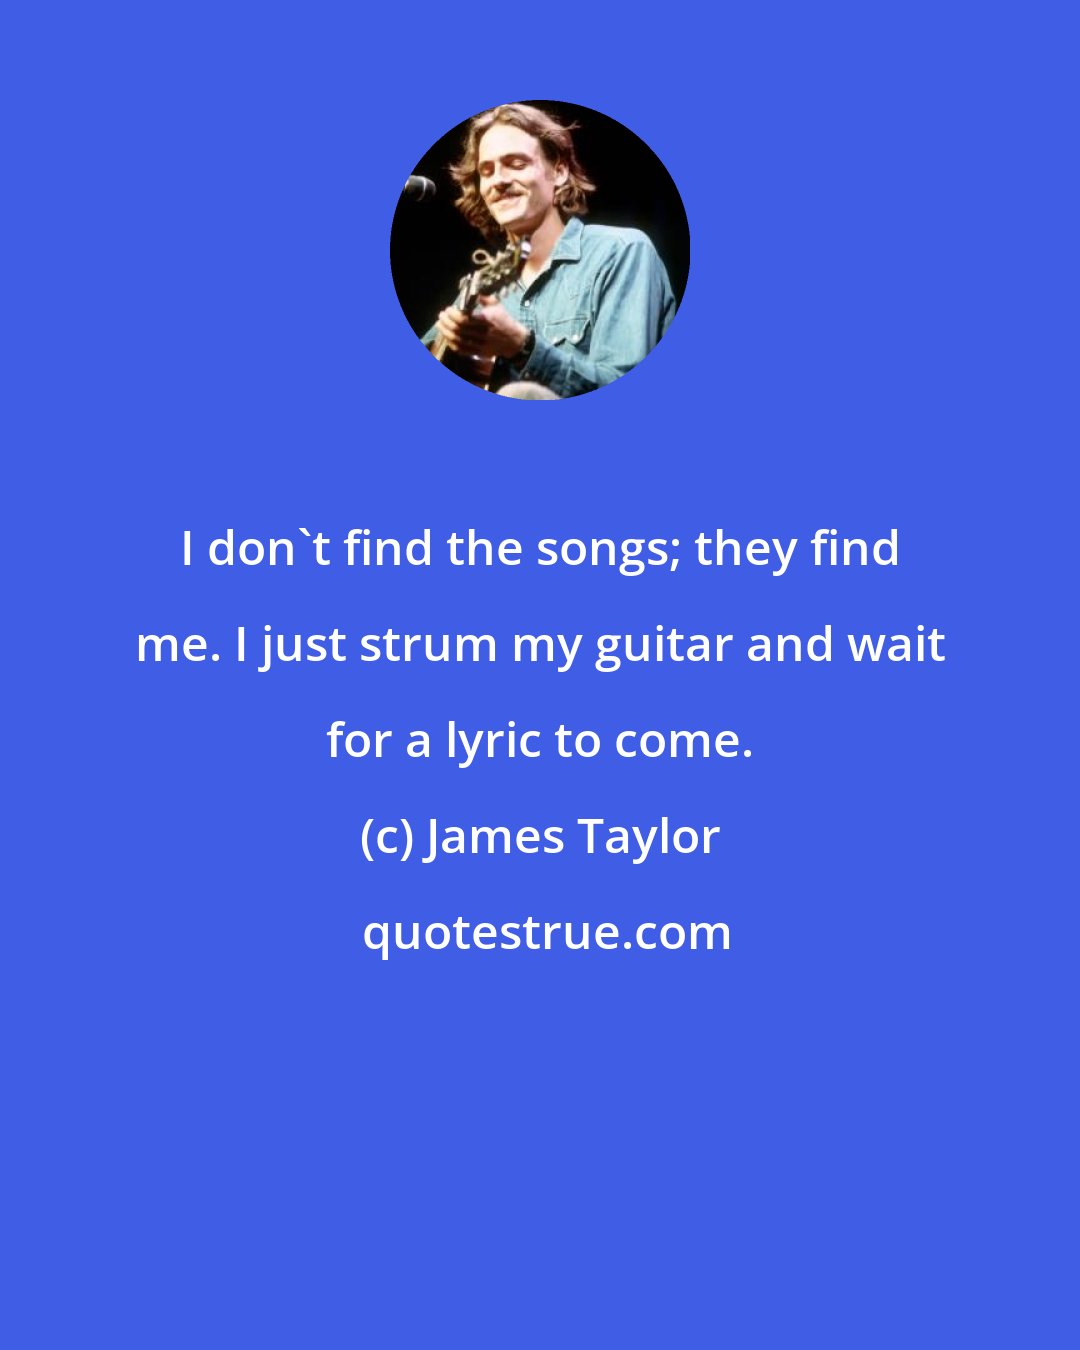 James Taylor: I don't find the songs; they find me. I just strum my guitar and wait for a lyric to come.